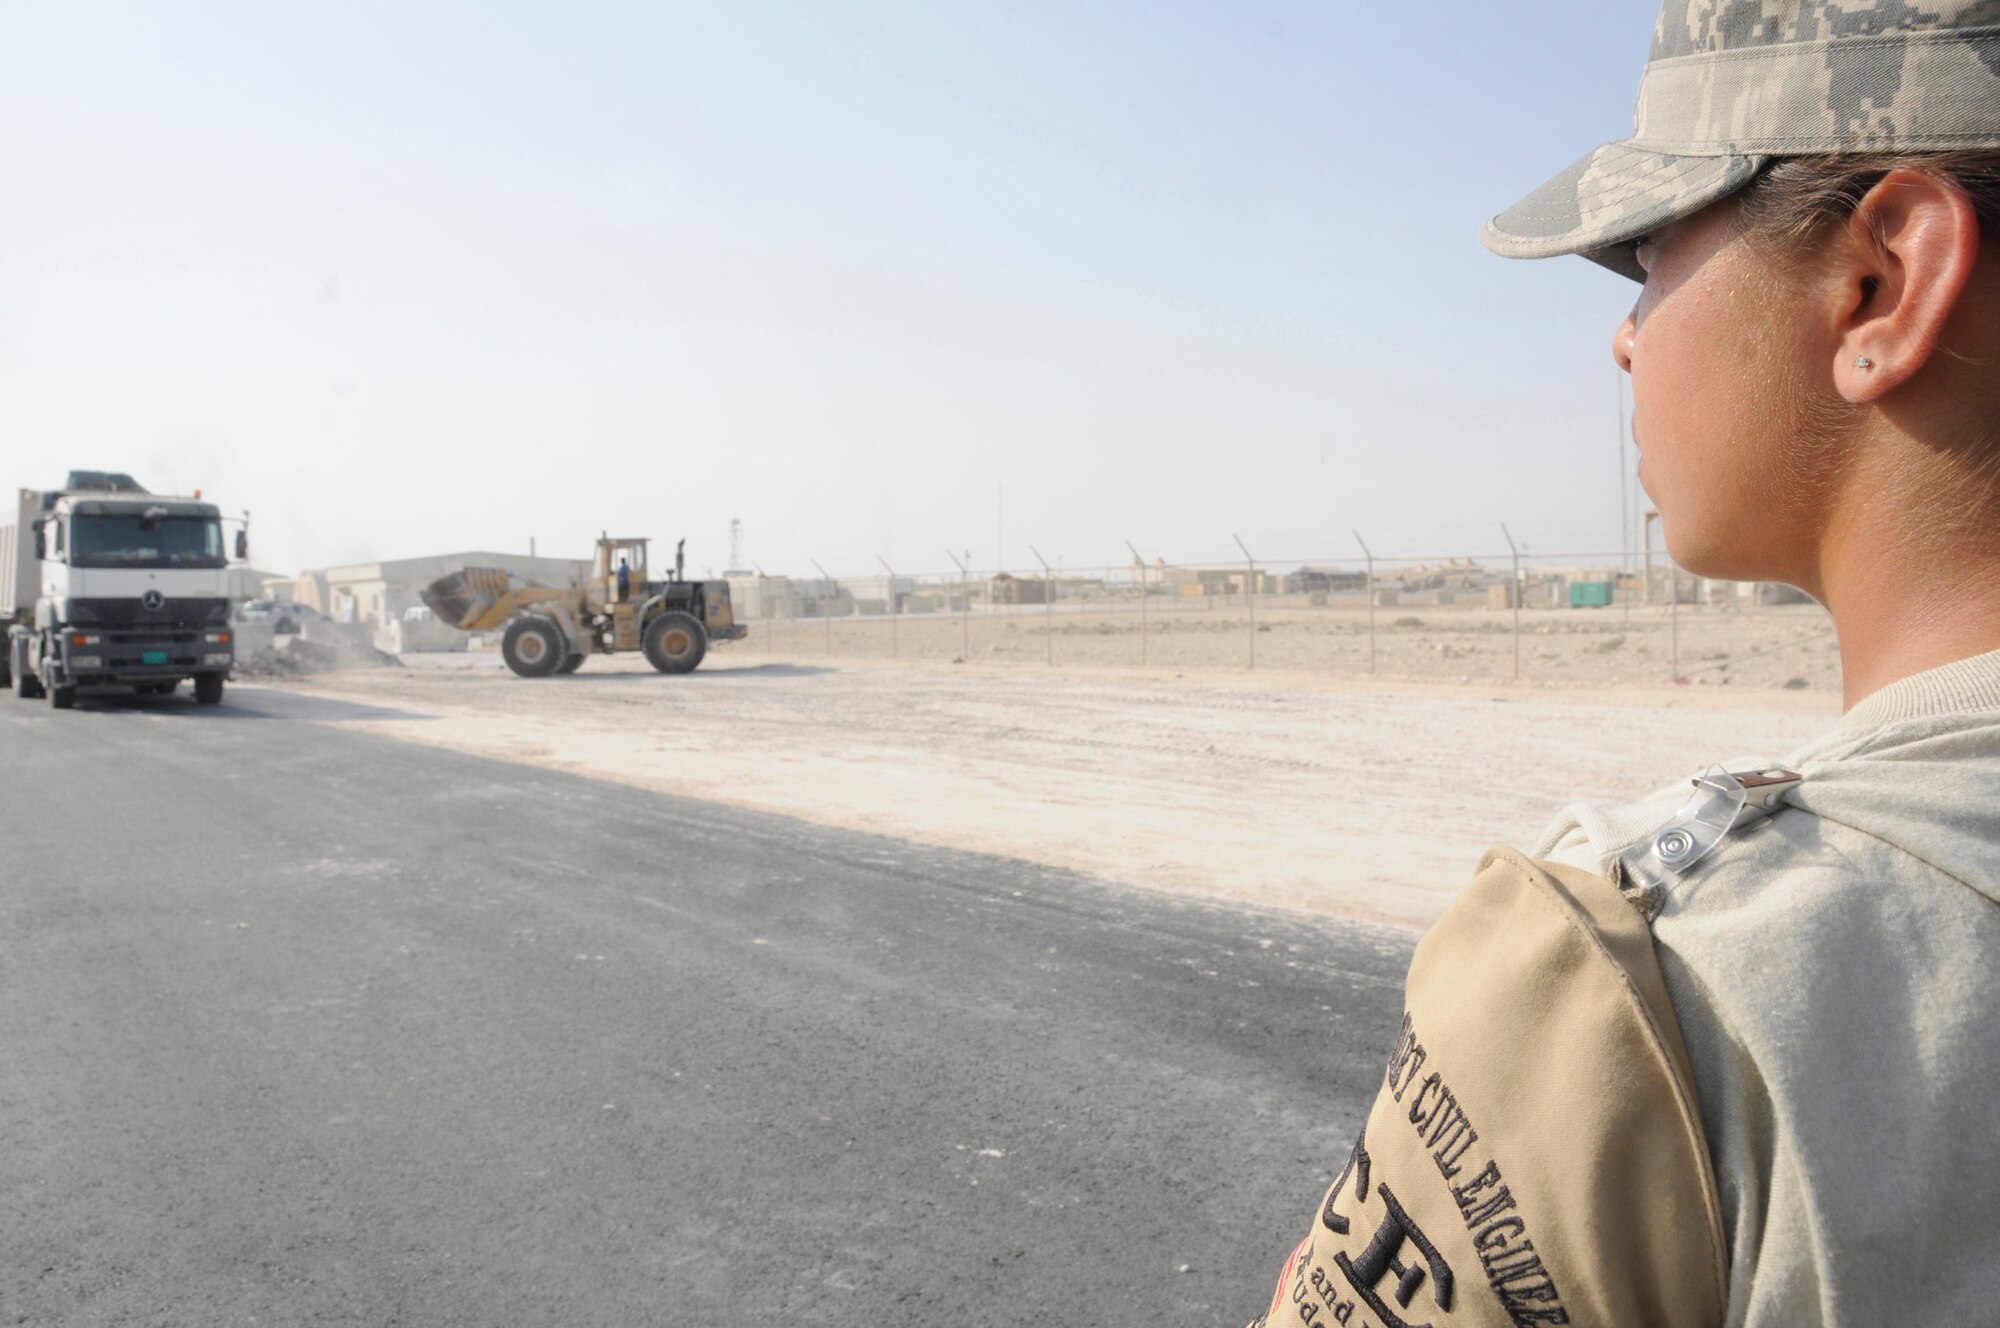 Senior Airman Brenna Reynolds, escort assigned to the 379th Expeditionary Civil Engineer Squadron, watches the third country national contractors as they work  Nov. 13, at an undisclosed air base in Southwest Asia. The 379 ECES escort members stay vigilant to ensure third country national contractors here complete their jobs and don?t perform any acts that would endanger deployed members. Airman Reynolds, a native of Van Horn, Texas, is deployed from Shaw Air Force Base, S.C., in support of Operations Iraqi and Enduring Freedom and Joint Task Force-Horn of Africa. (U.S. Air Force photo by Staff Sgt. Darnell T. Cannady/Released)